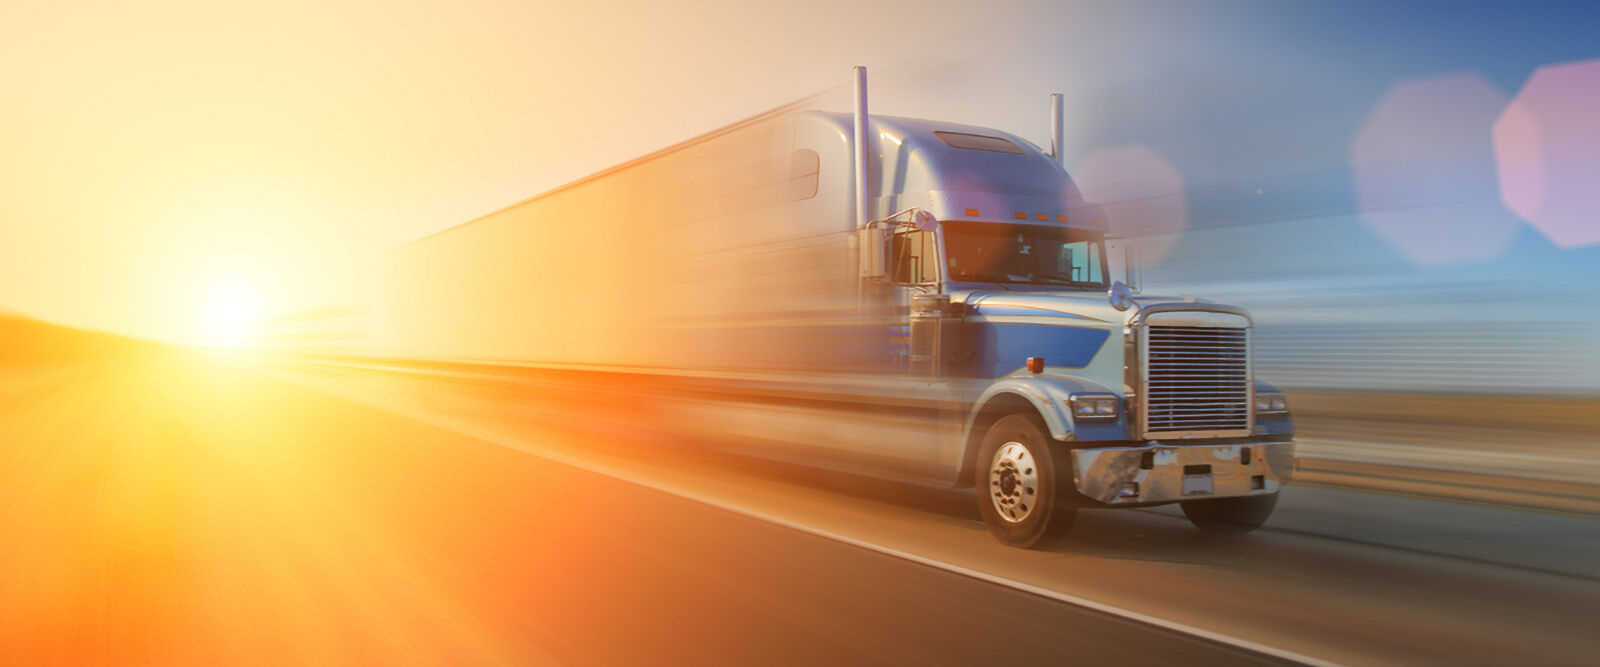 Auto Liability Insurance - Semi Truck on highway at sunset.